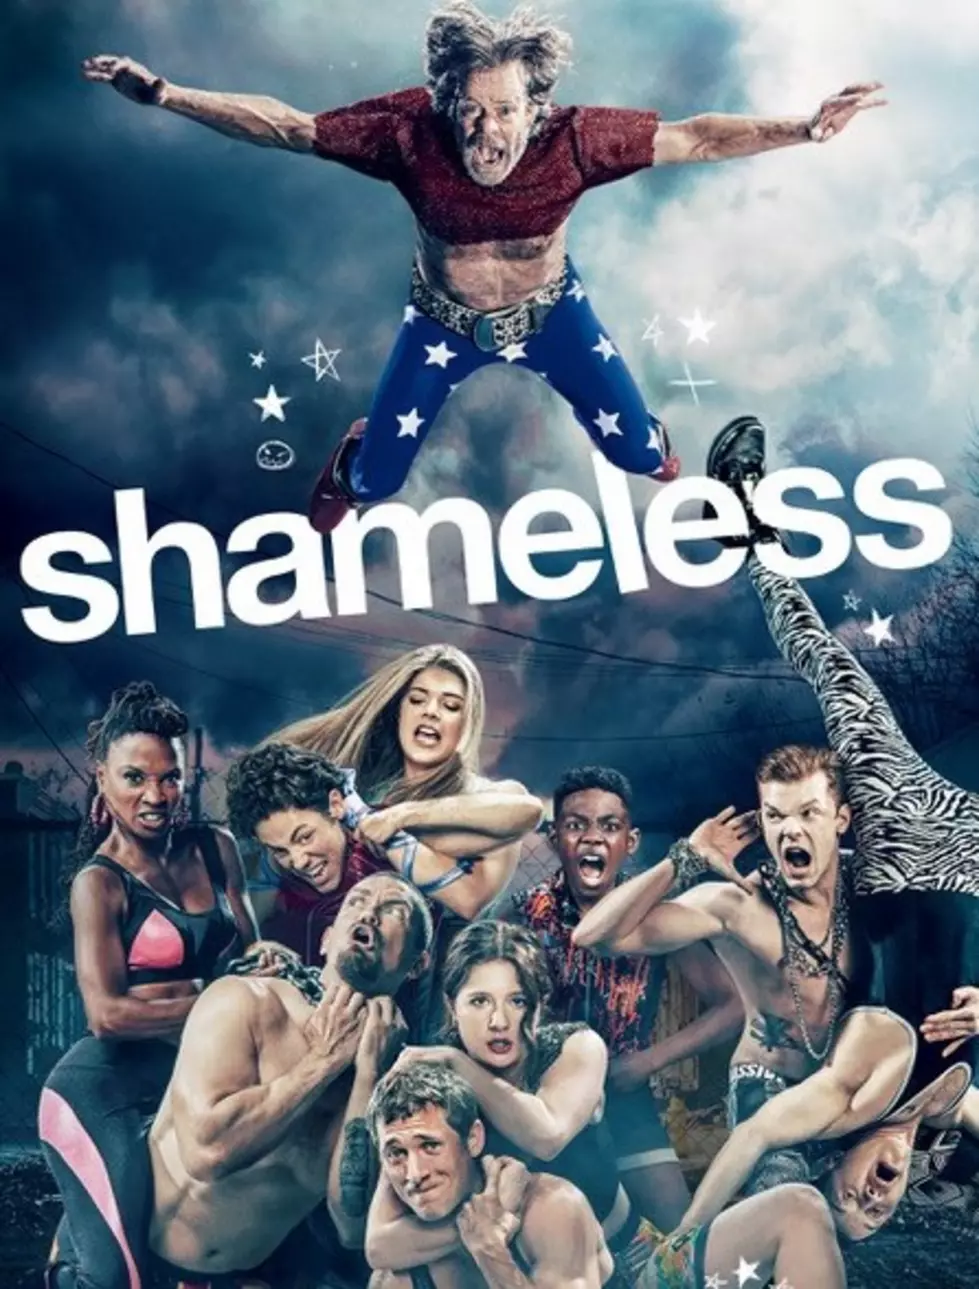 The Gallaghers Are Back for Season 10 of the hit Show “Shameless”